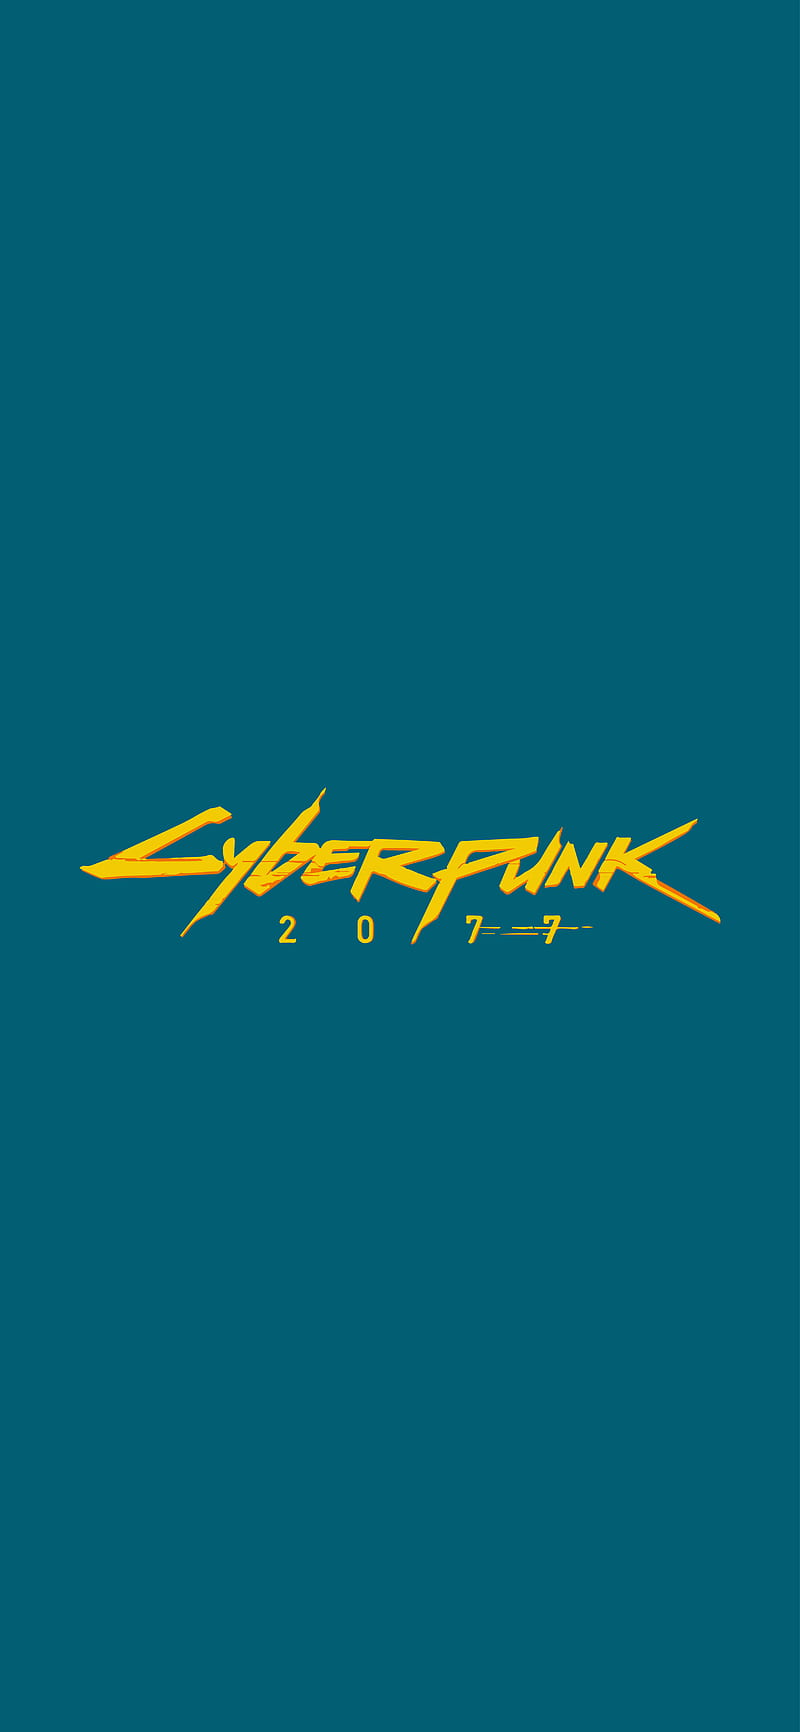 I created a futuristic  cyberpunk themed minimalist wallpaper 3840 x  2160 Inverse colors available upon request  Minimalist wallpaper  Cyberpunk Wallpaper